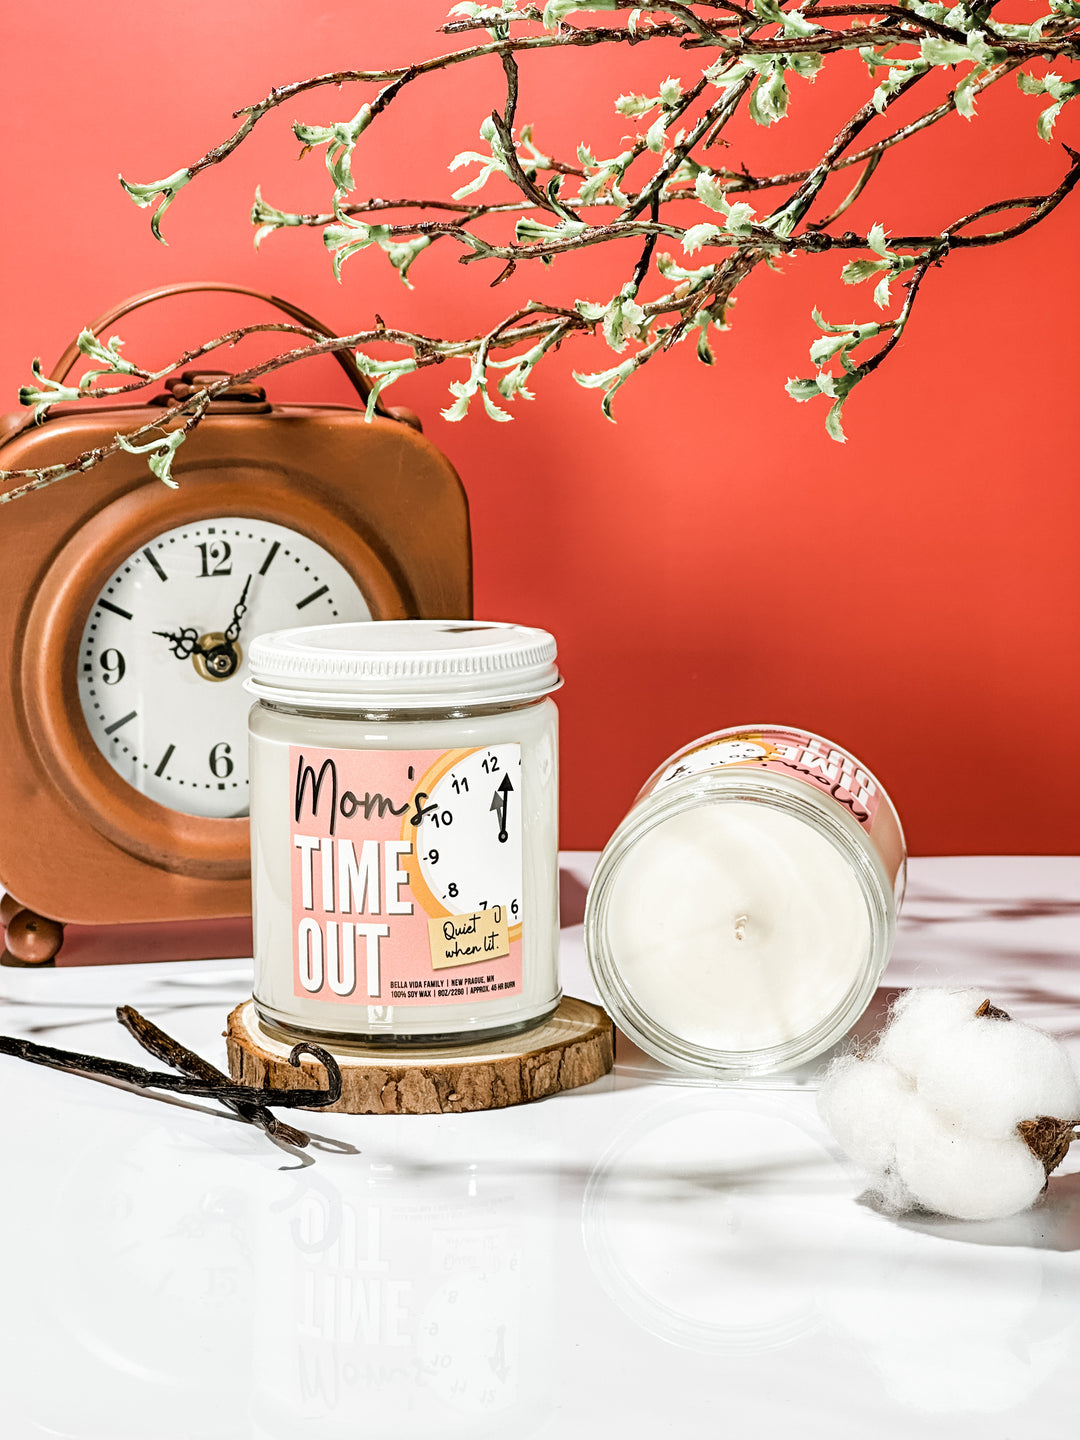 Mom's Time Out 8oz Soy Candle